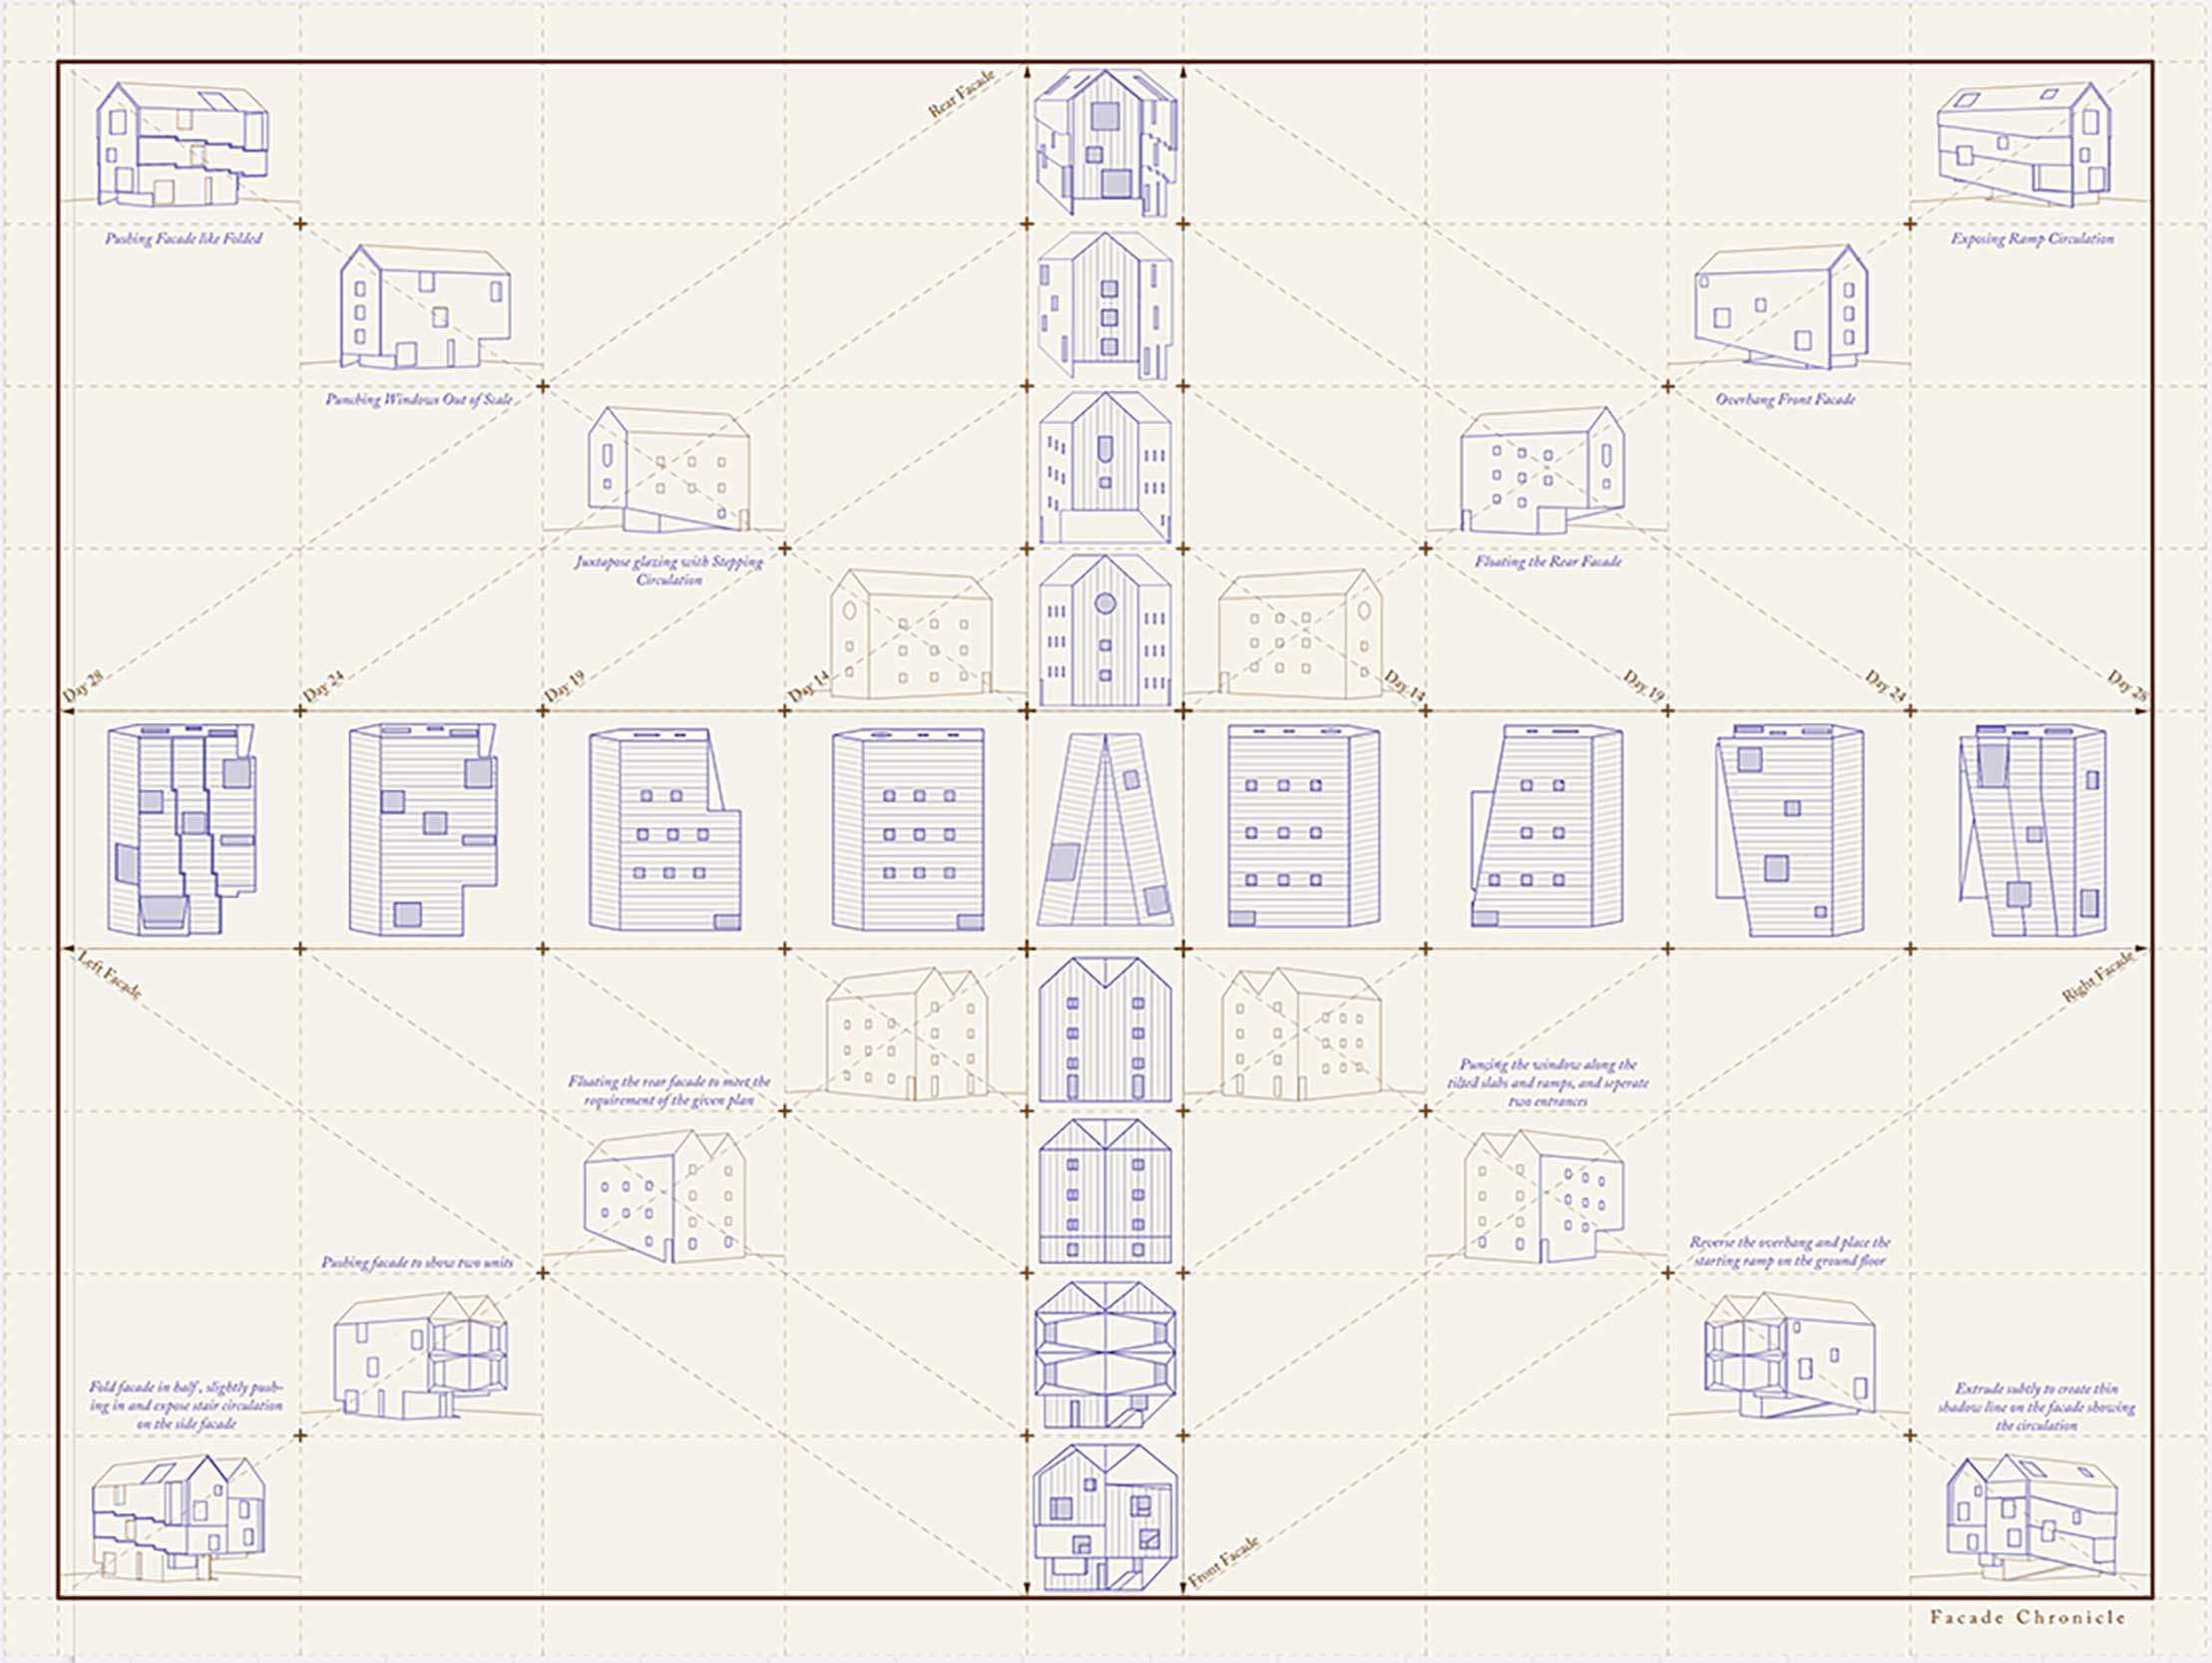 Architectural drawing of several structures drawn in blue and arranged in a grid